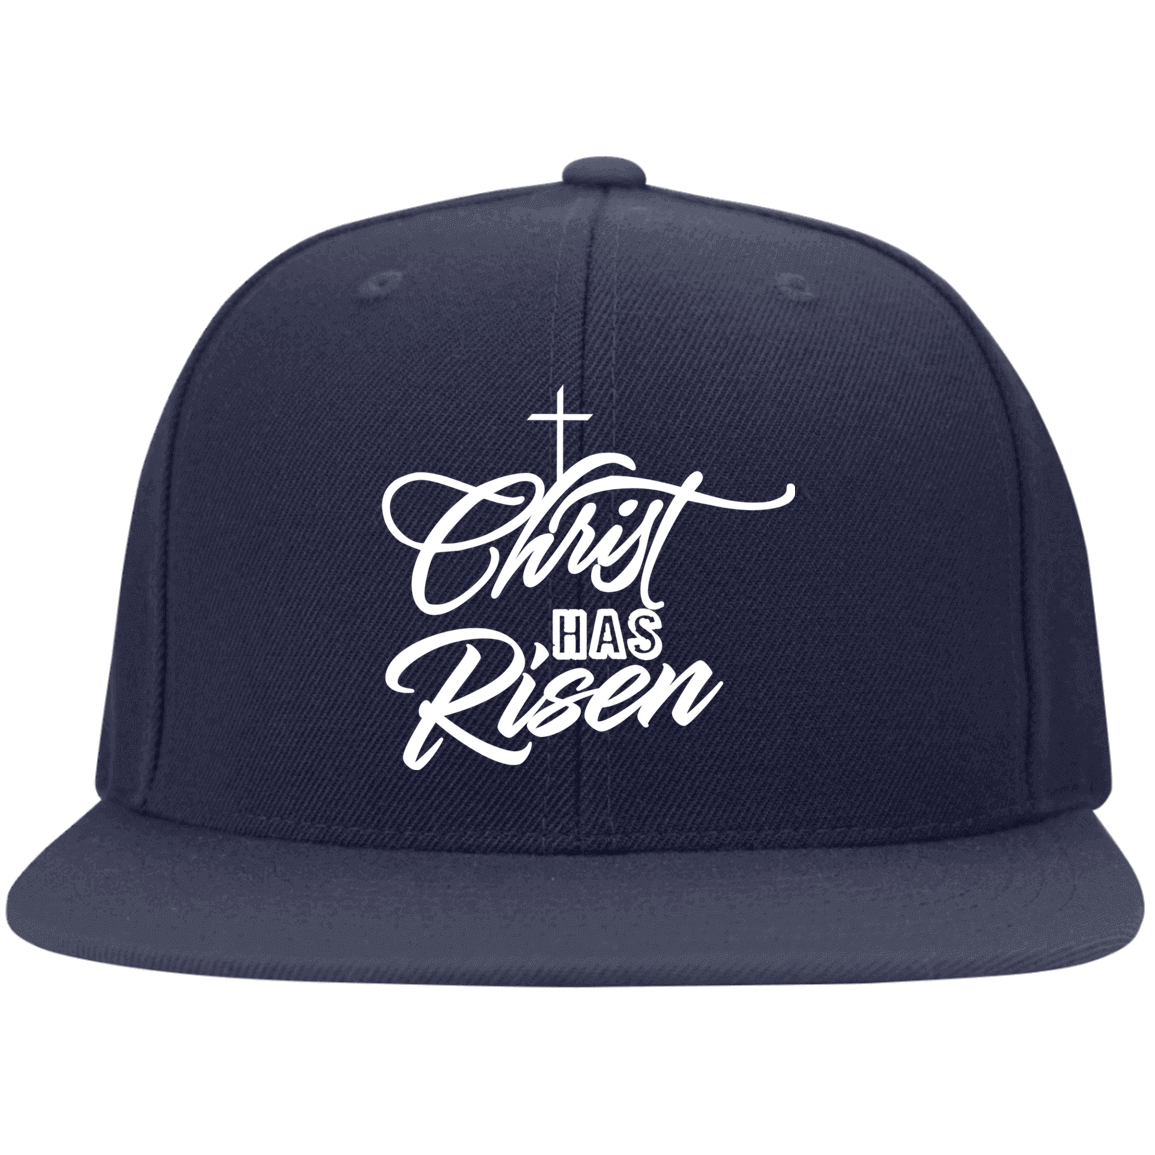 Christ Has Risen Embroidered Fitted Cap